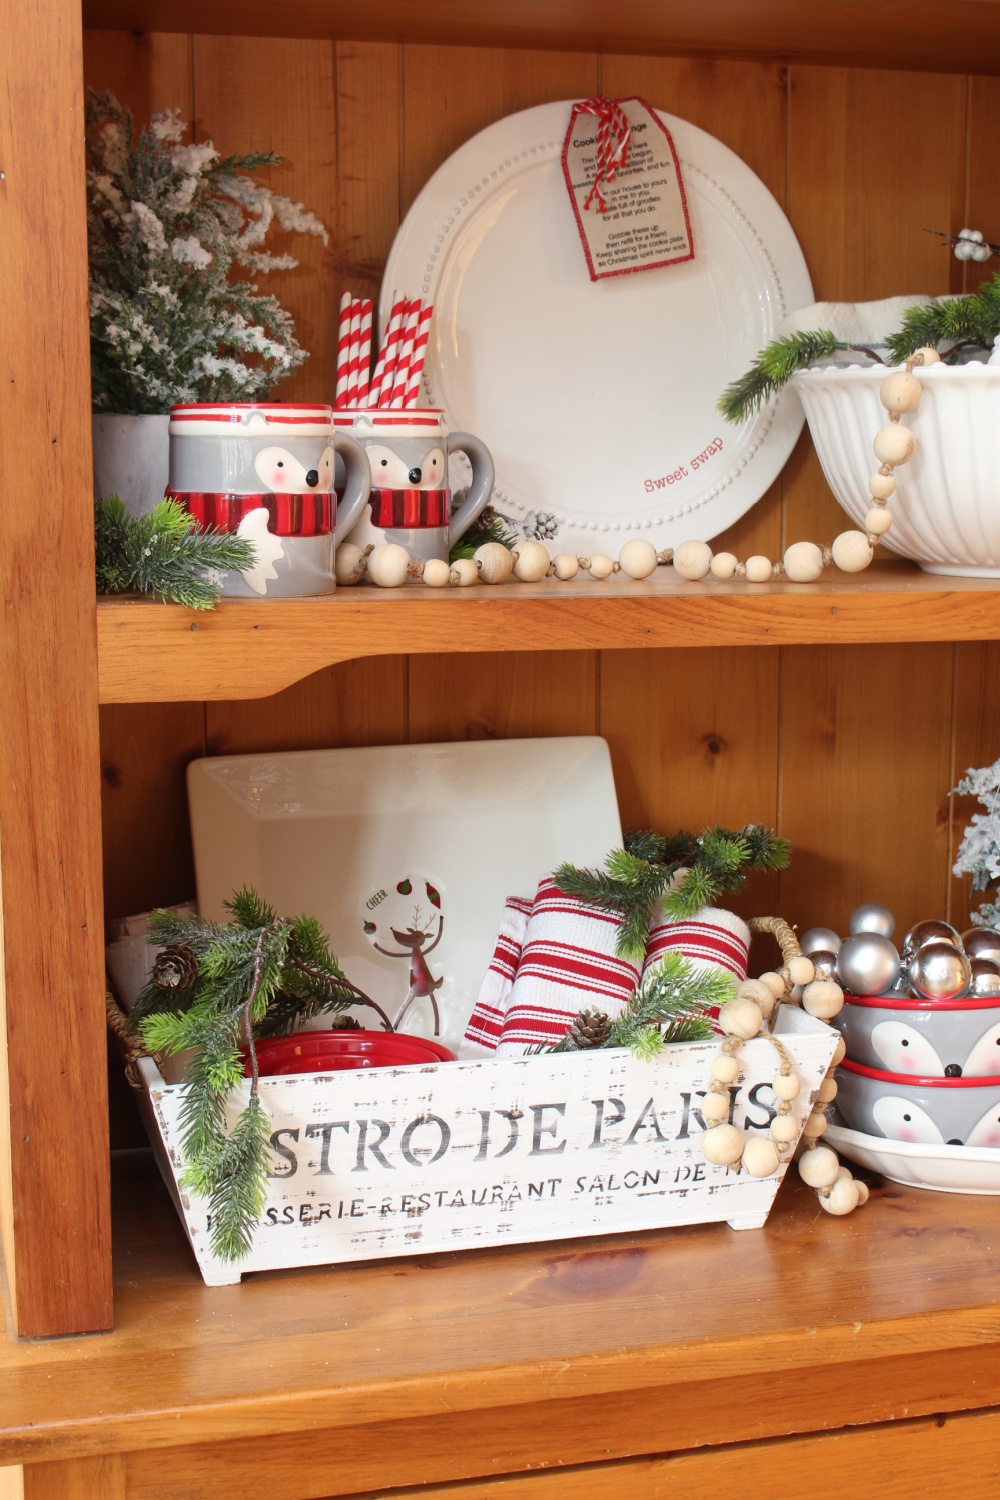 https://www.cleanandscentsible.com/wp-content/uploads/2021/12/red-and-white-Christmas-kitchen-decor-ideas-42-Clean-and-Scentsible.jpg